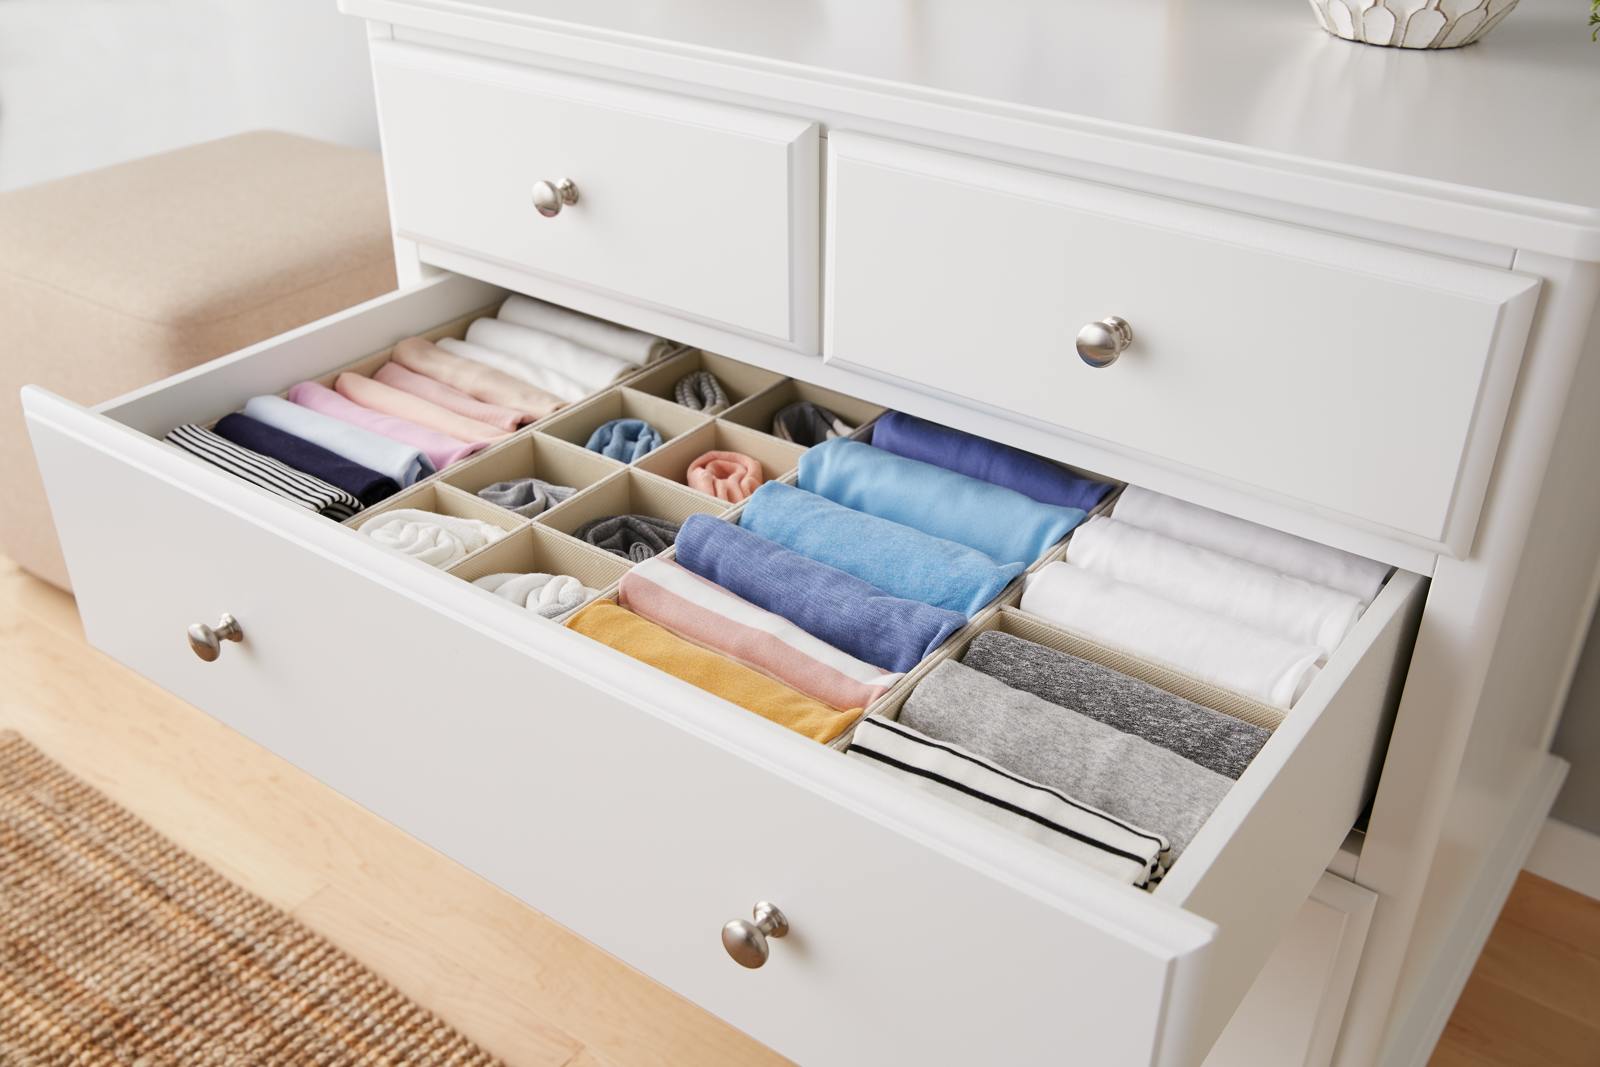 organize-your-dresser-drawers-like-a-professional-container-stories